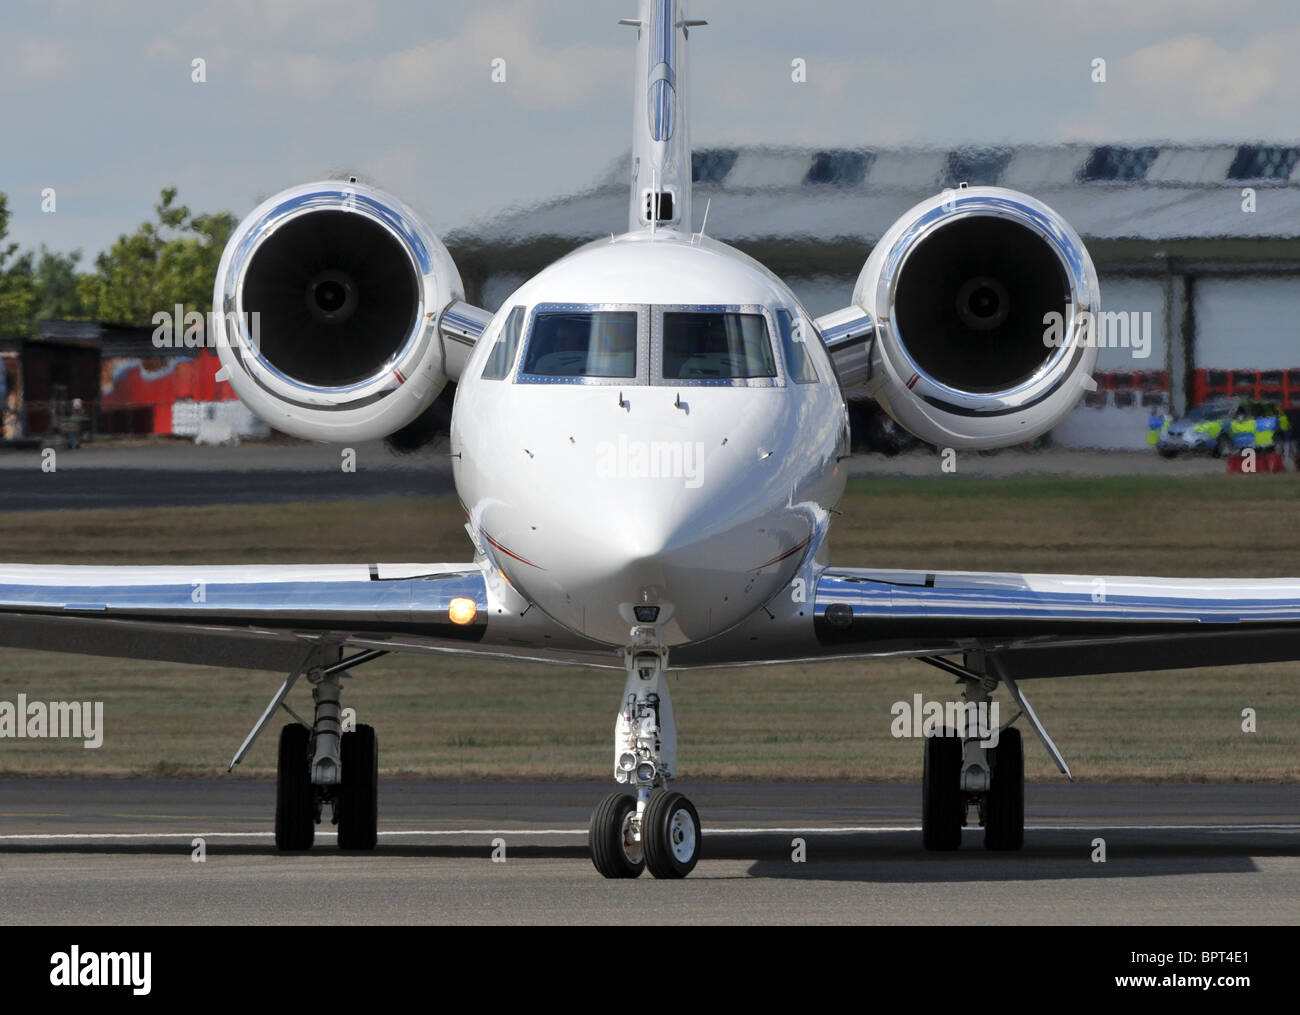 Private jet, jet plane on the runway, UK Stock Photo